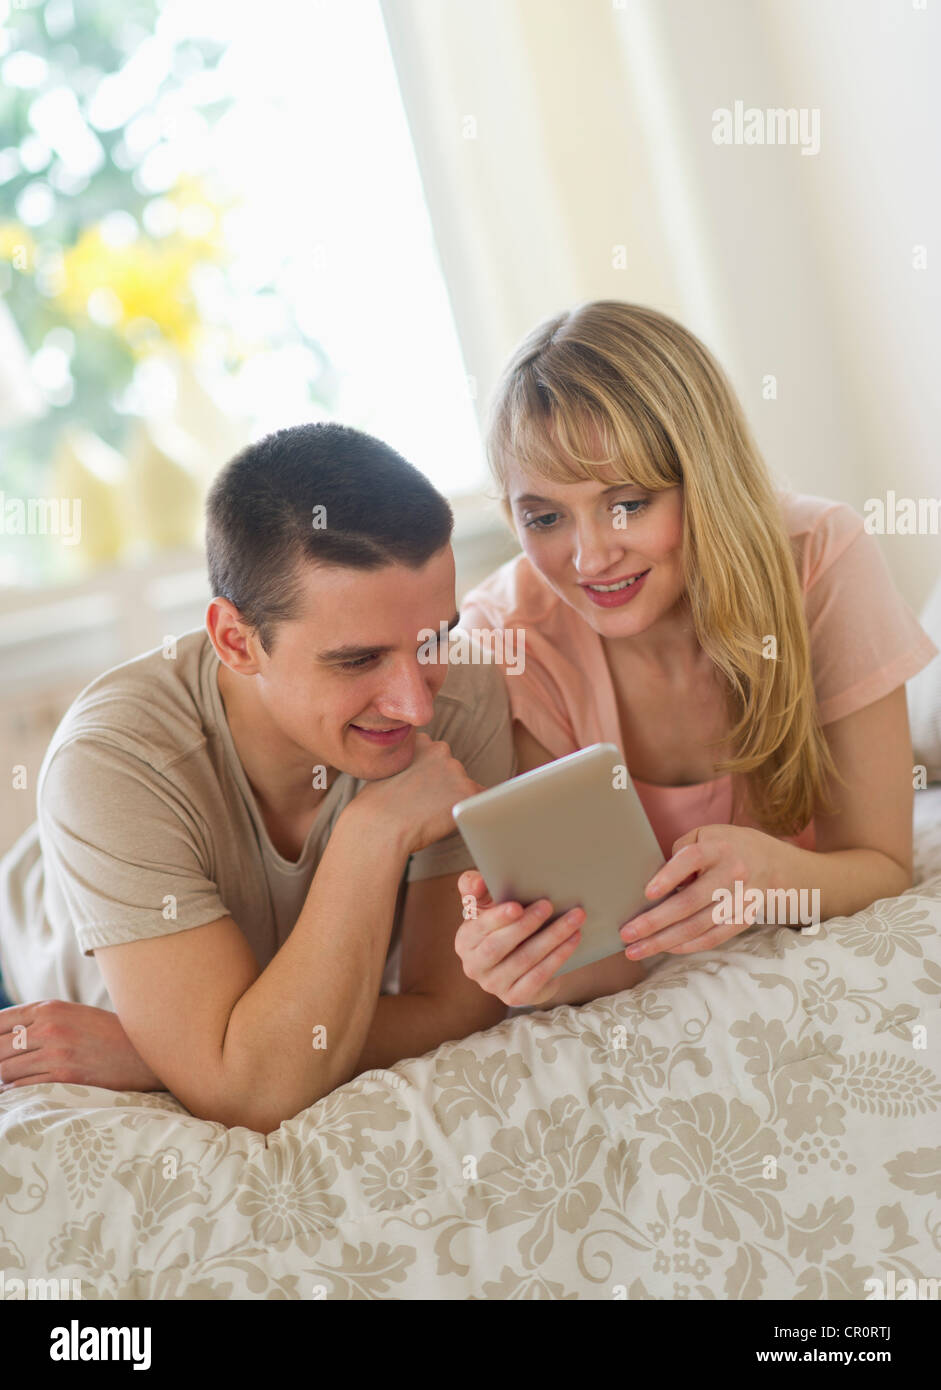 USA, New Jersey, Jersey City, Couple lying on bed and using digital tablet Banque D'Images